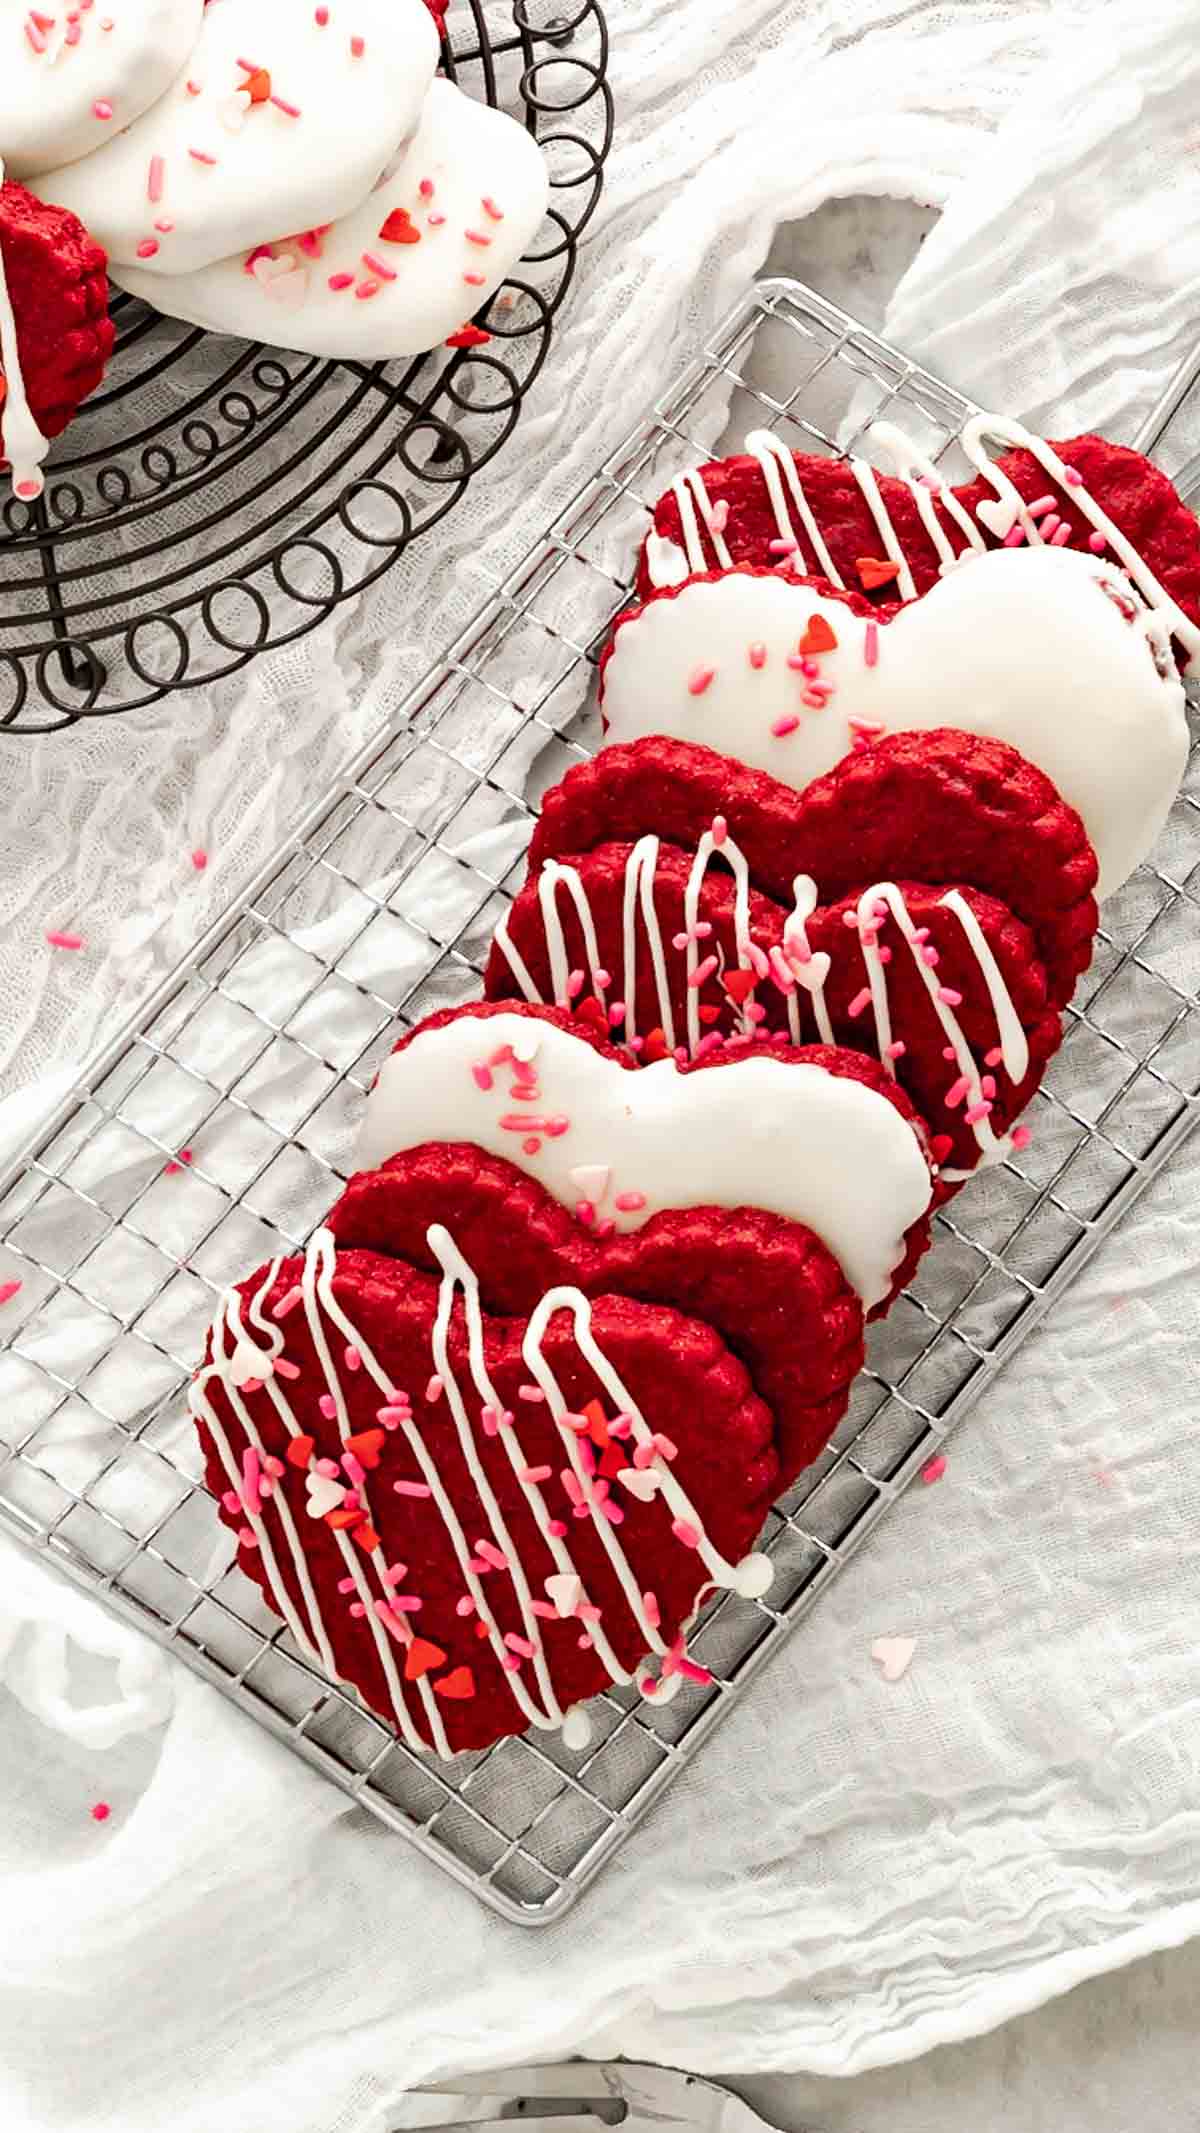 Heart shaped red velvet shortbread cookies decorated for Valentine's Day.